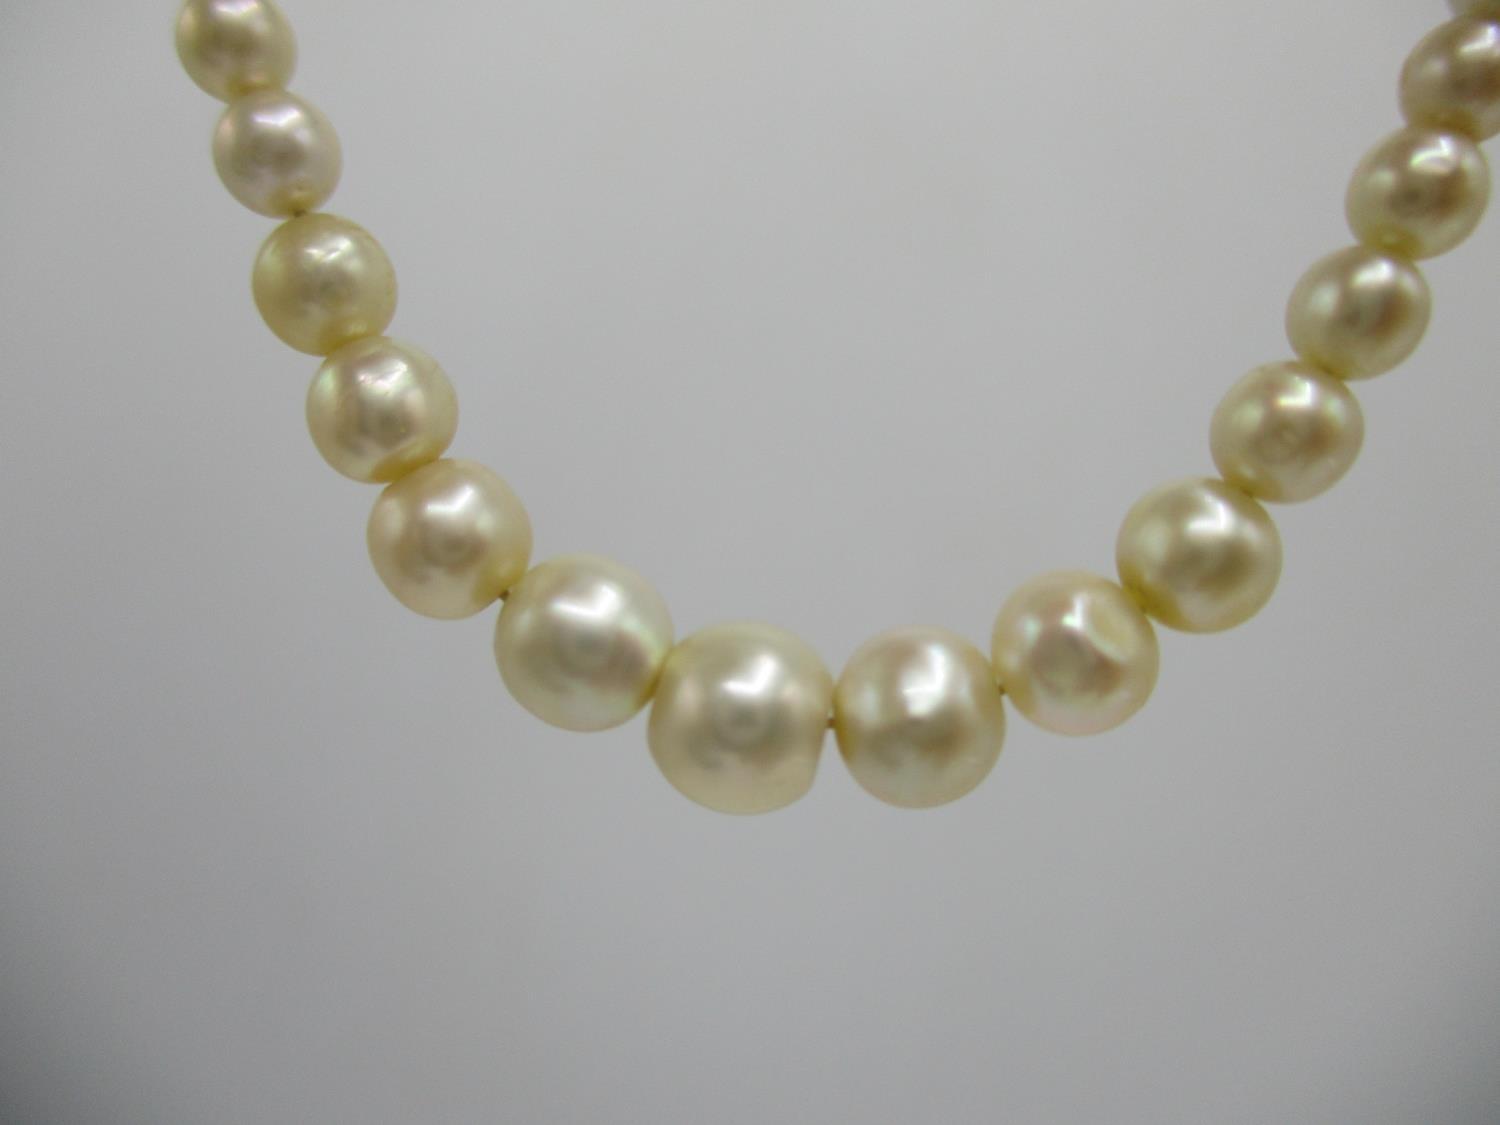 A natural pearl necklace with a gold clasp set with diamonds - Image 6 of 6